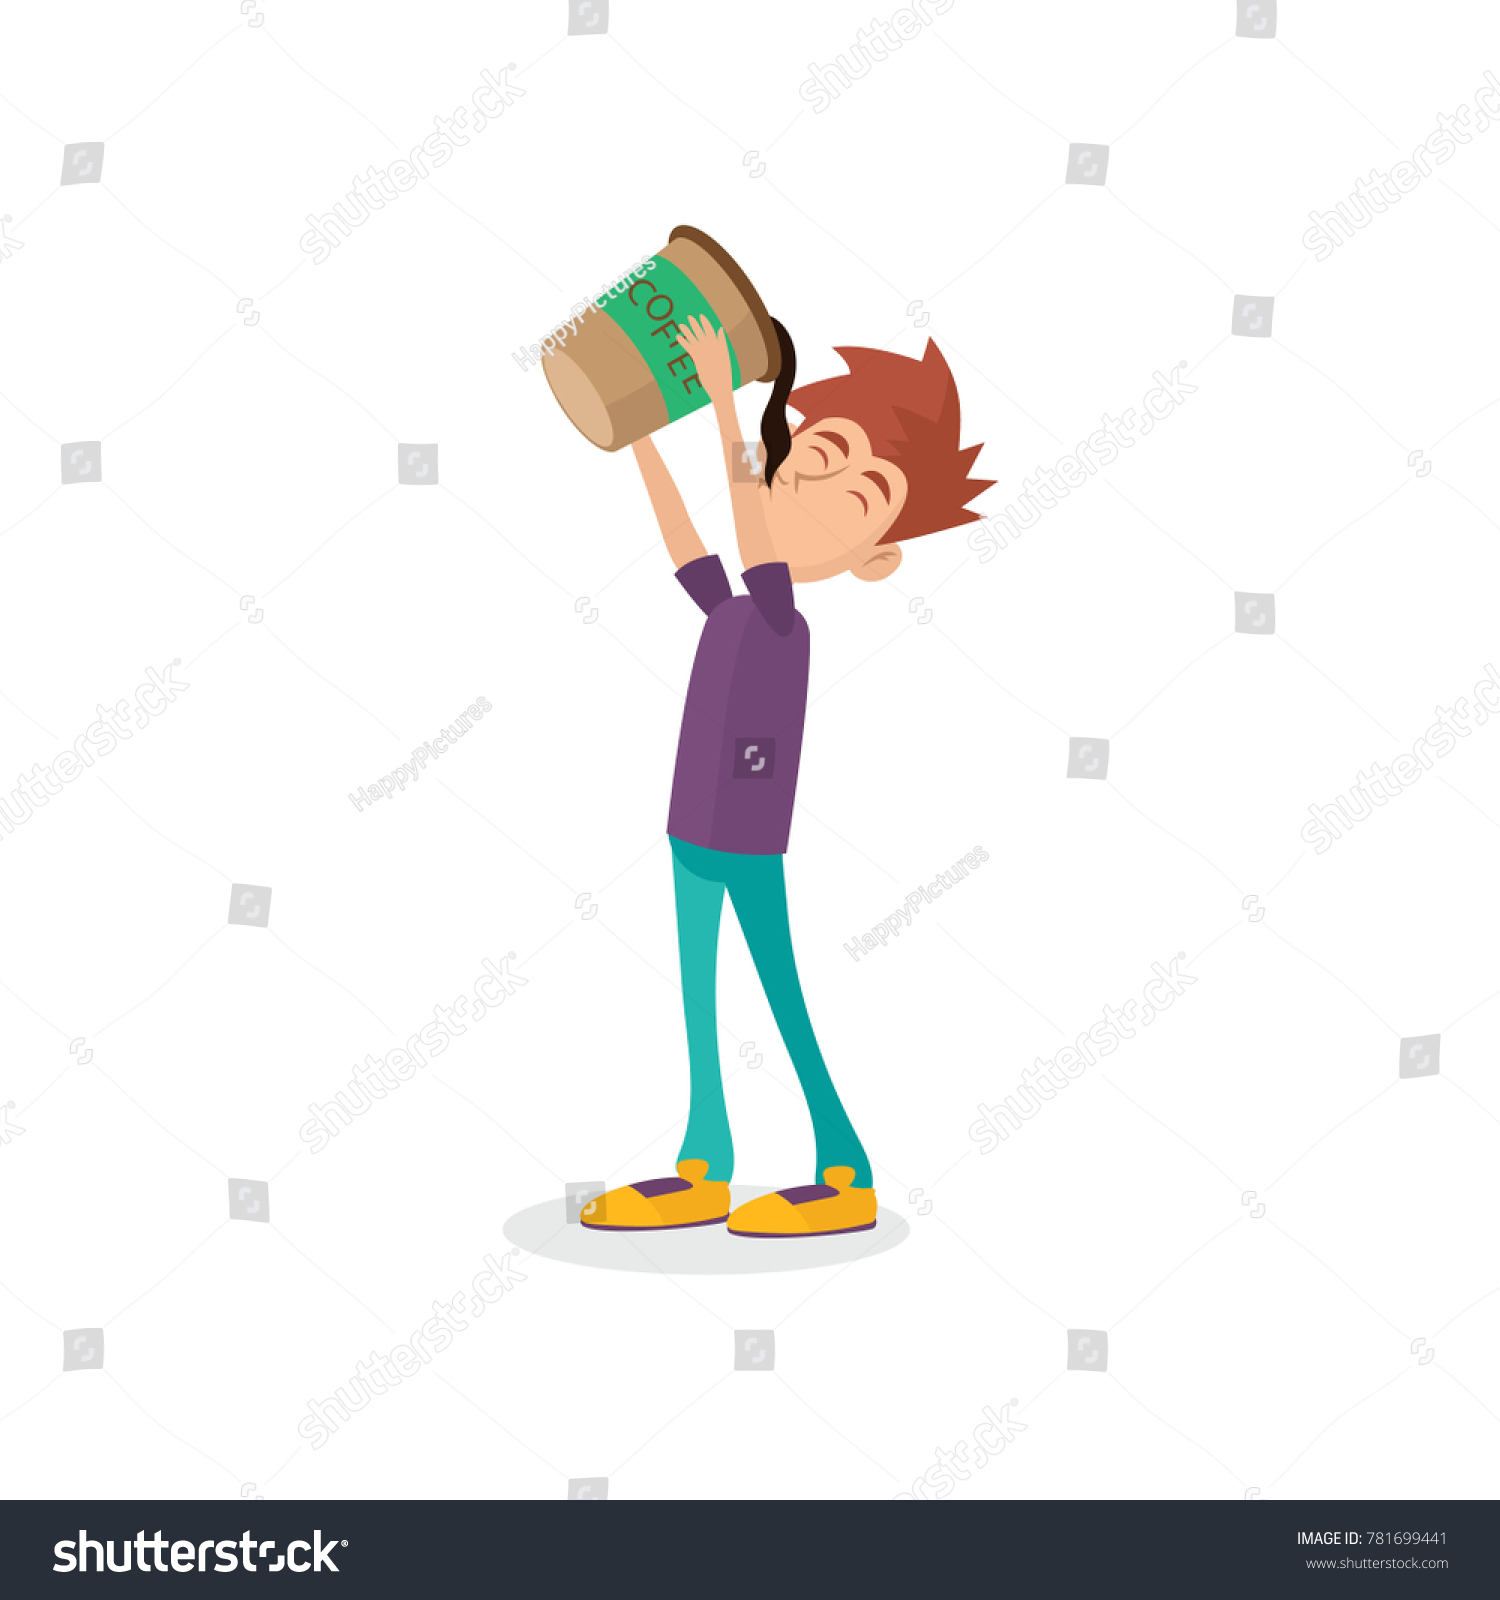 SVG of Cartoon male character drinking oversized cup of black coffee. Man with coffeemania. Caffeine addiction. Bad habit concept. Isolated flat vector illustration svg